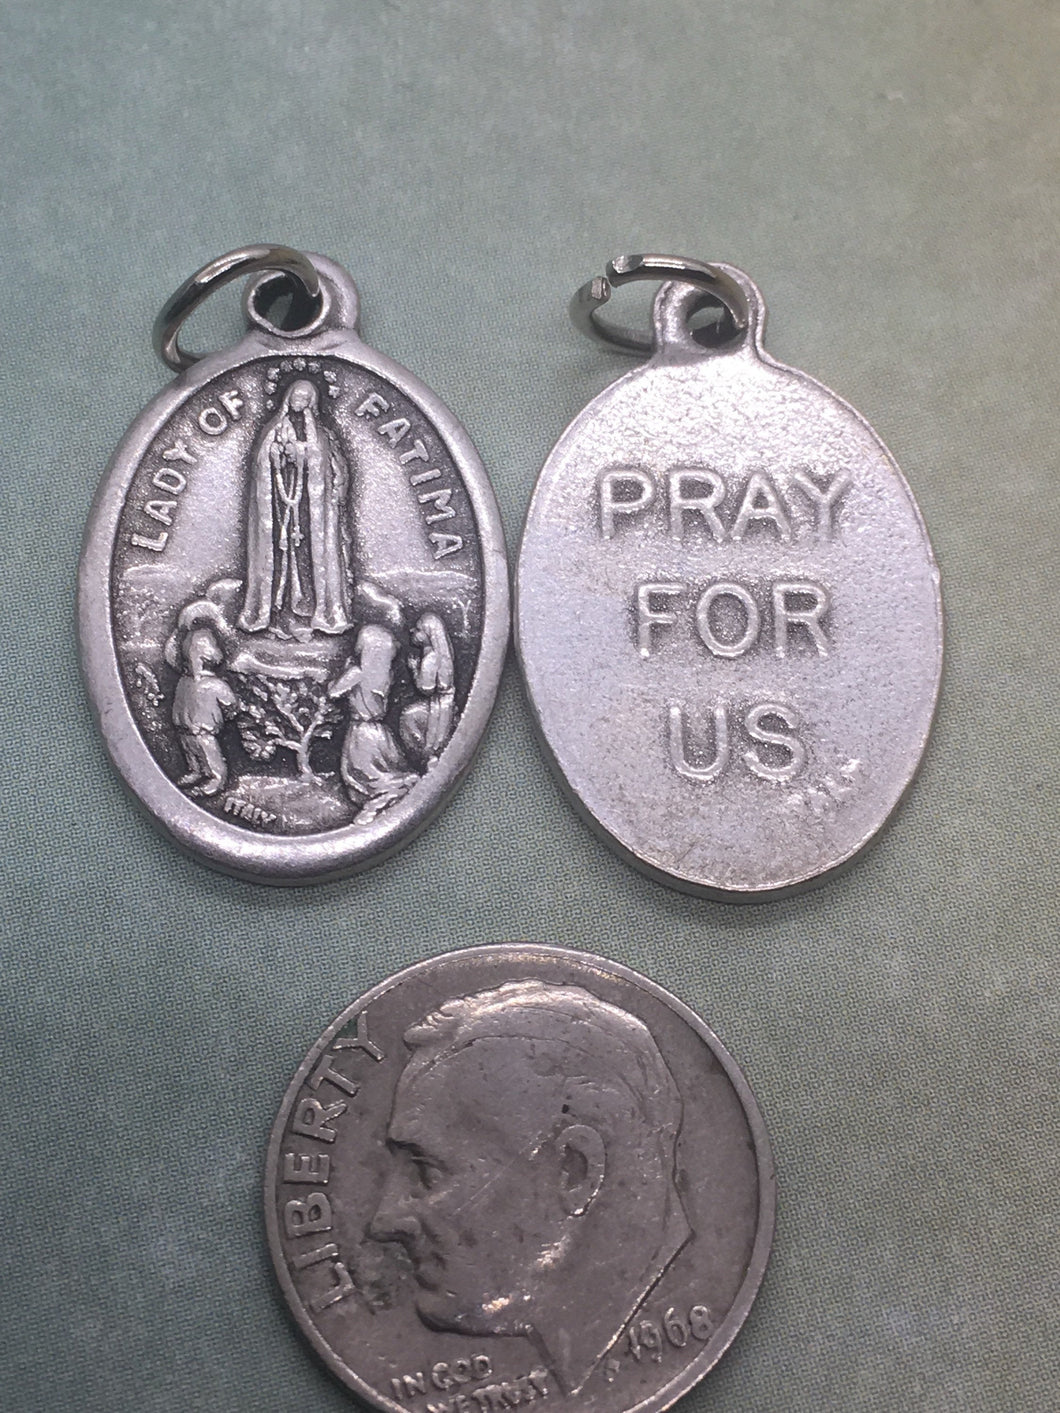 Our Lady of Fatima (1917) holy medal, 3 styles